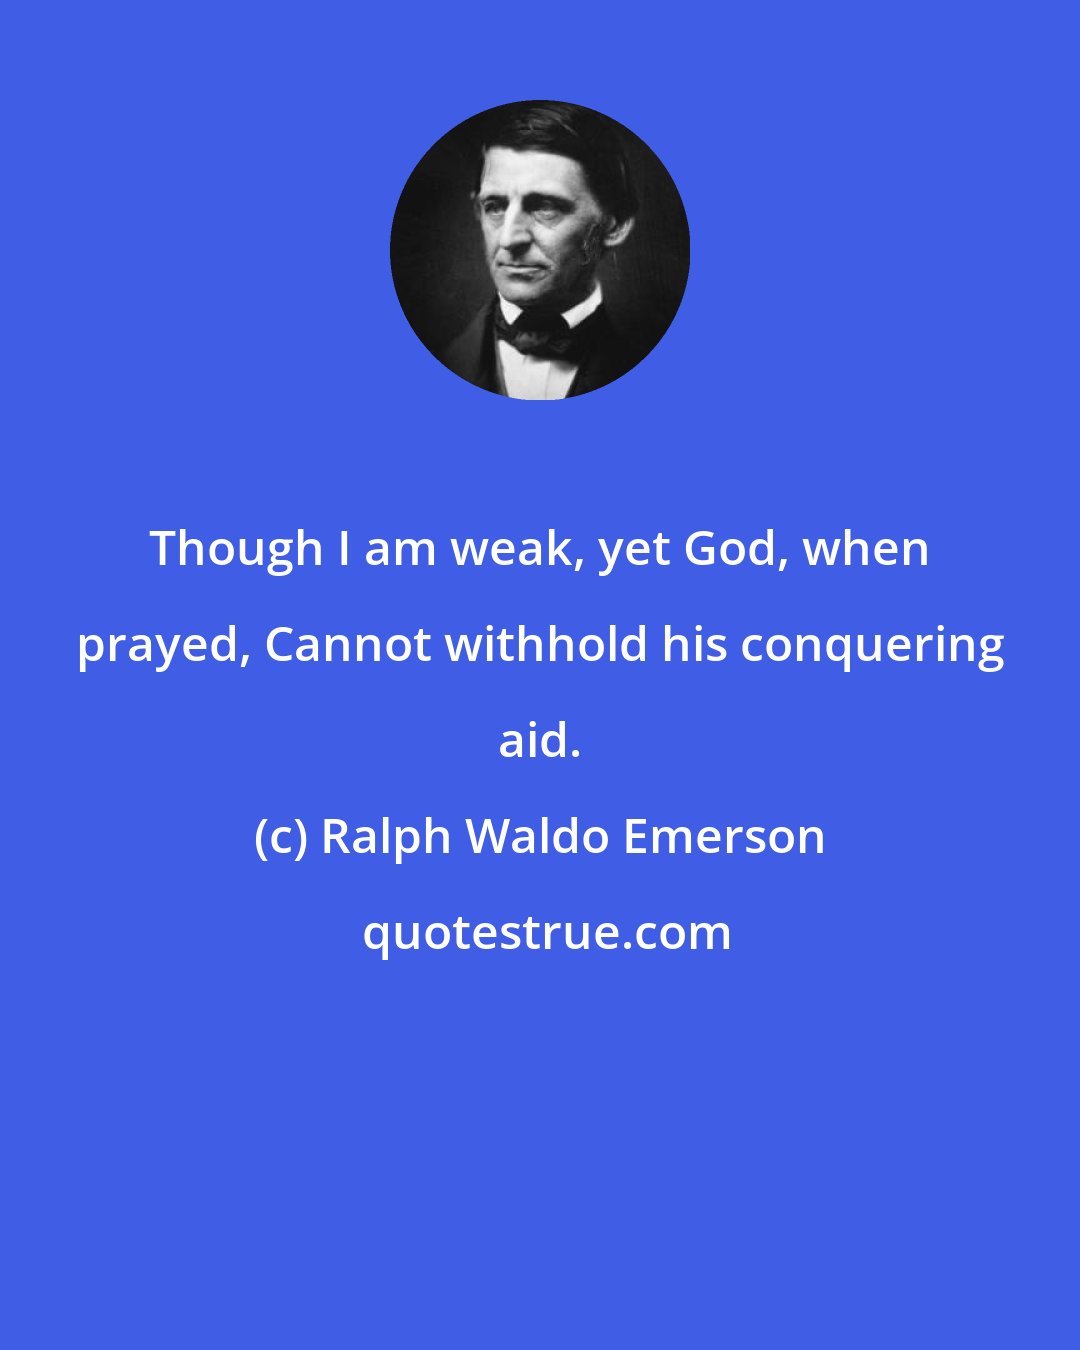 Ralph Waldo Emerson: Though I am weak, yet God, when prayed, Cannot withhold his conquering aid.